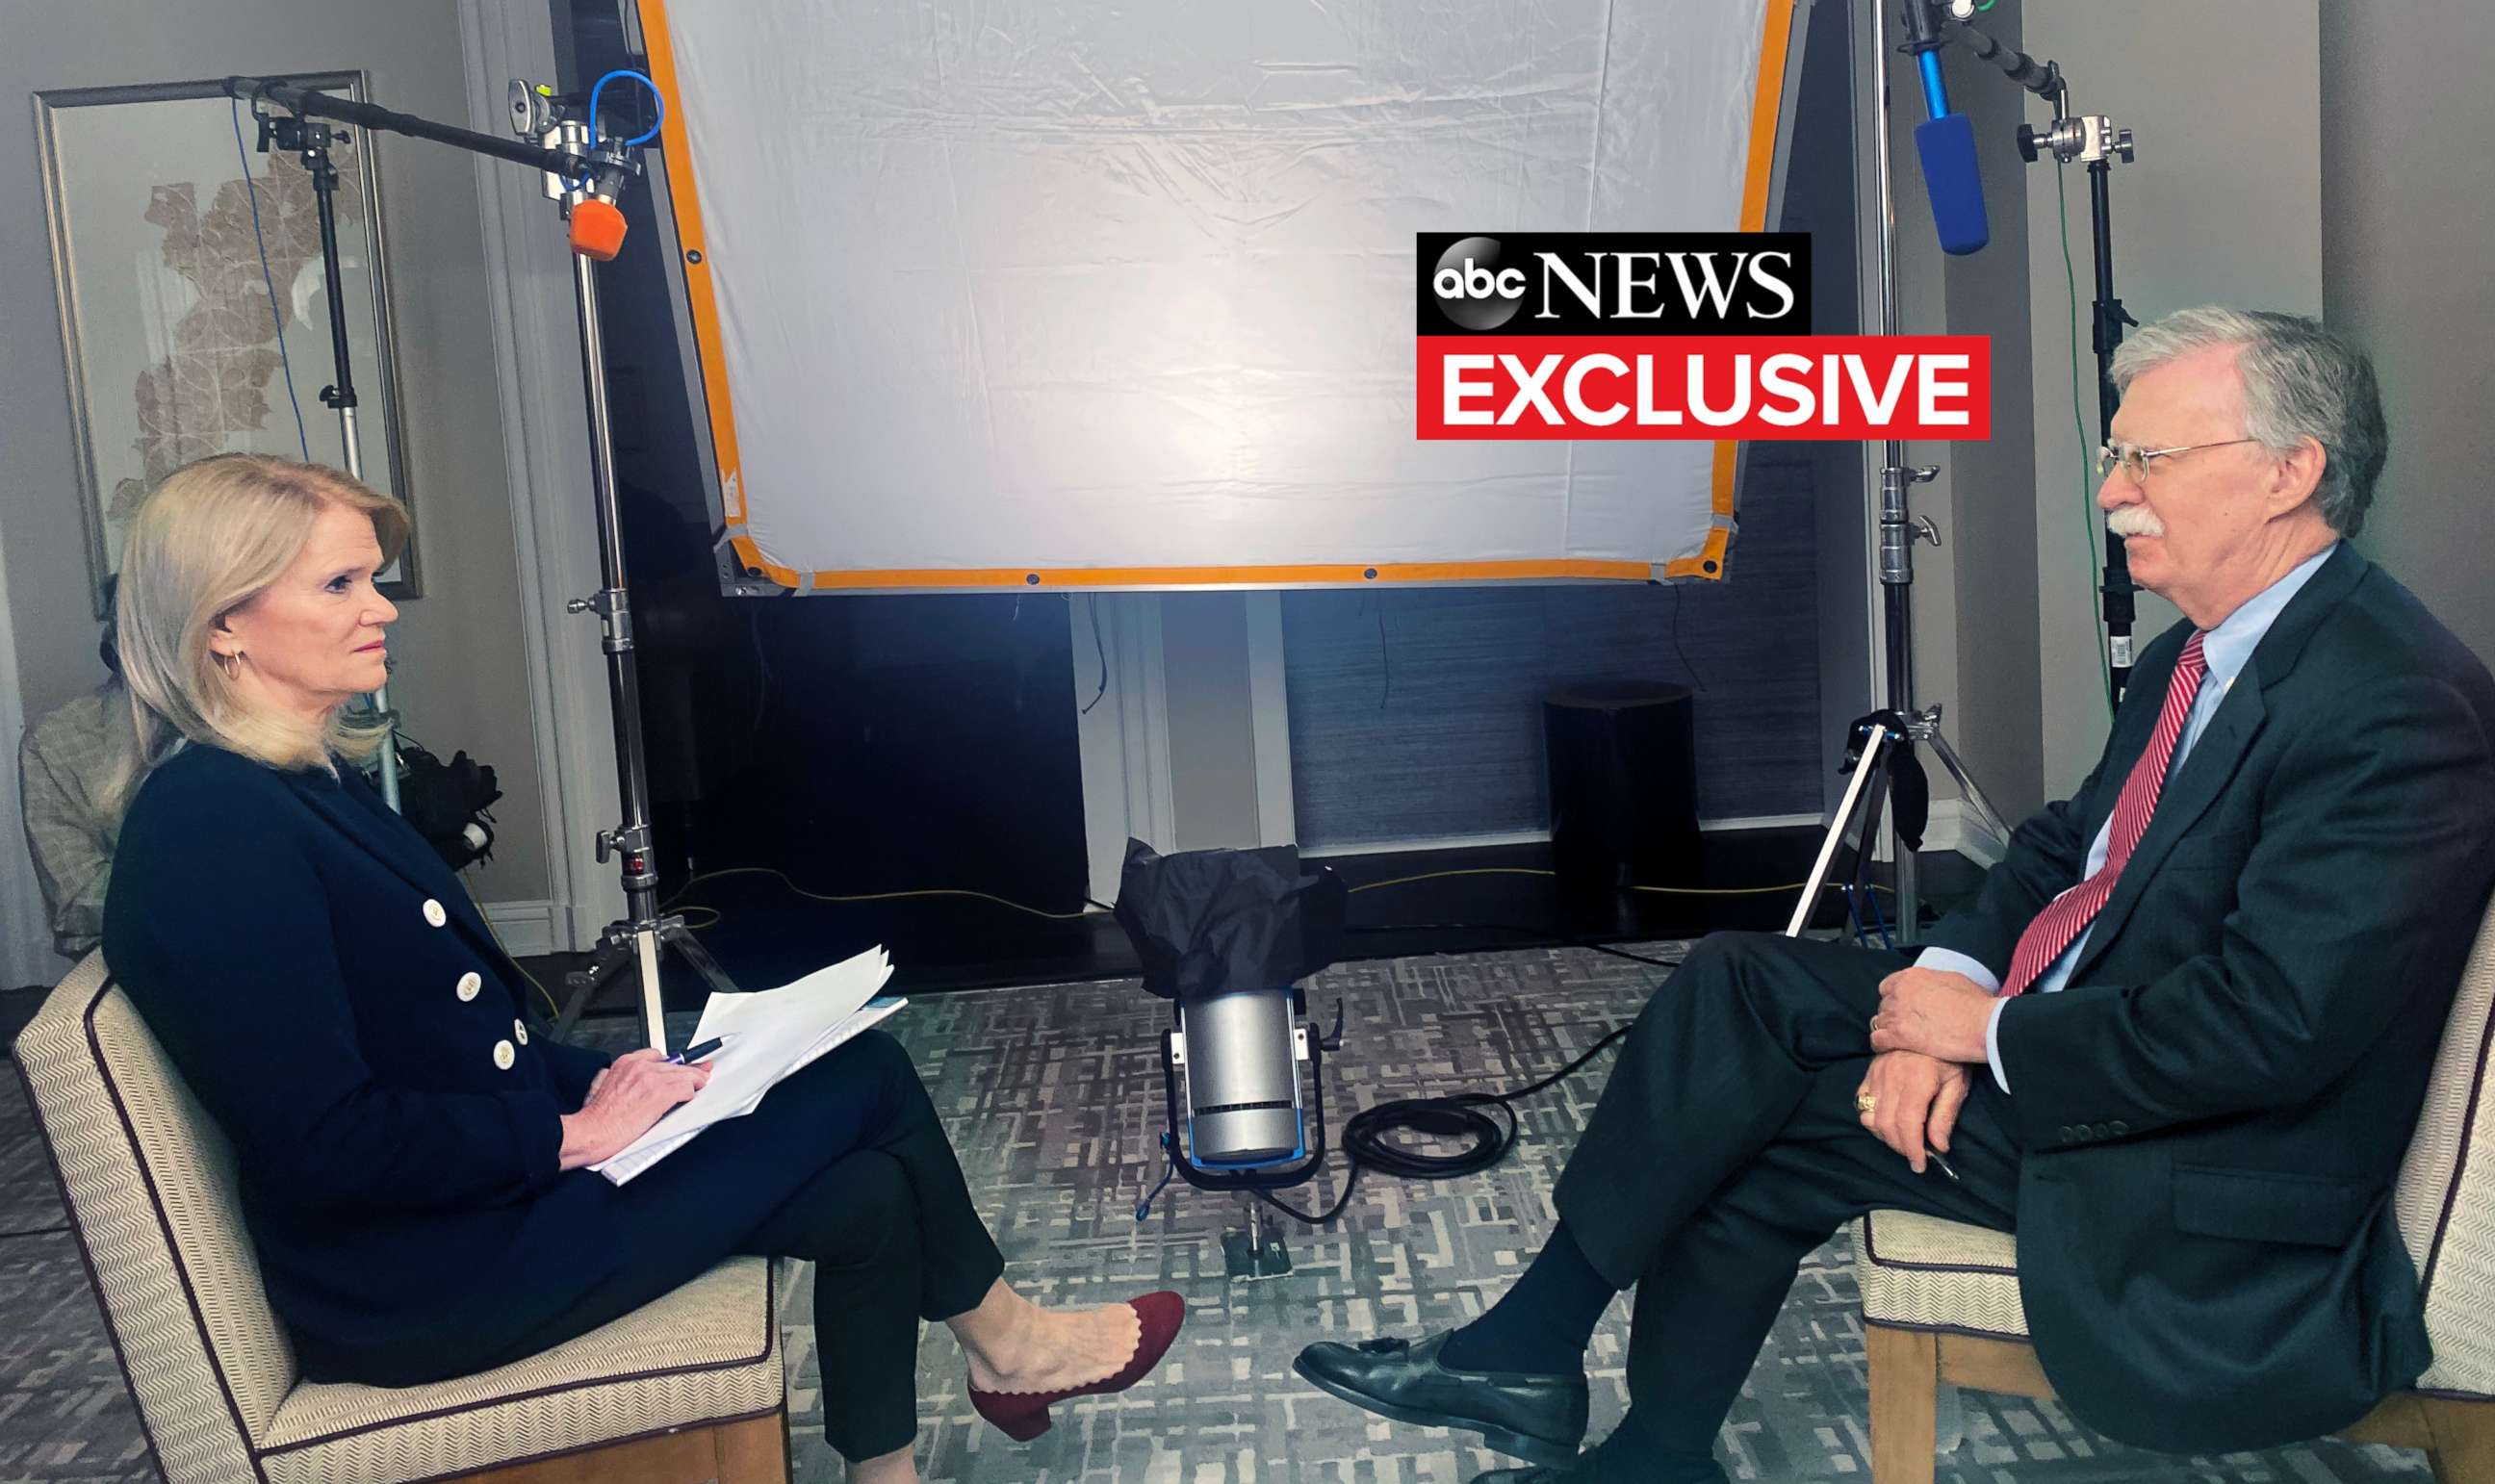 PHOTO: ABC's Martha Raddatz will have the first exclusive interview with John Bolton, former National Security Advisor to President Donald Trump, on his new book, "The Room Where It Happened: A White House Memoir," airing June 21, 2020 at 9pm ET on ABC.